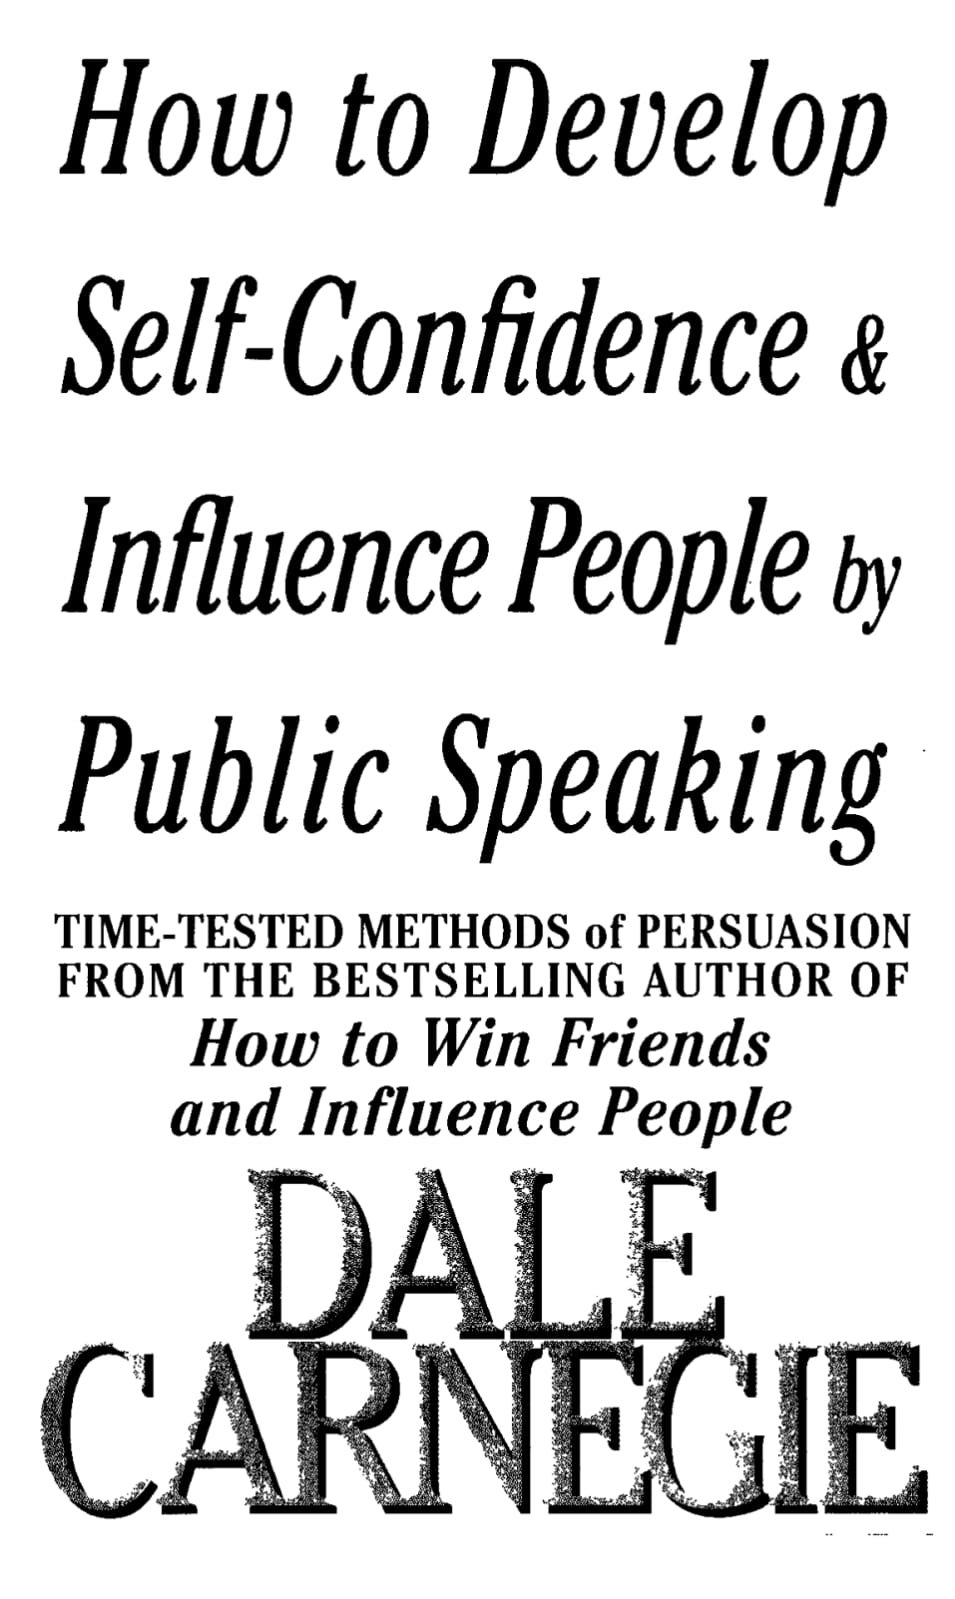 Self-Confidence & Influence People by Public Speaking